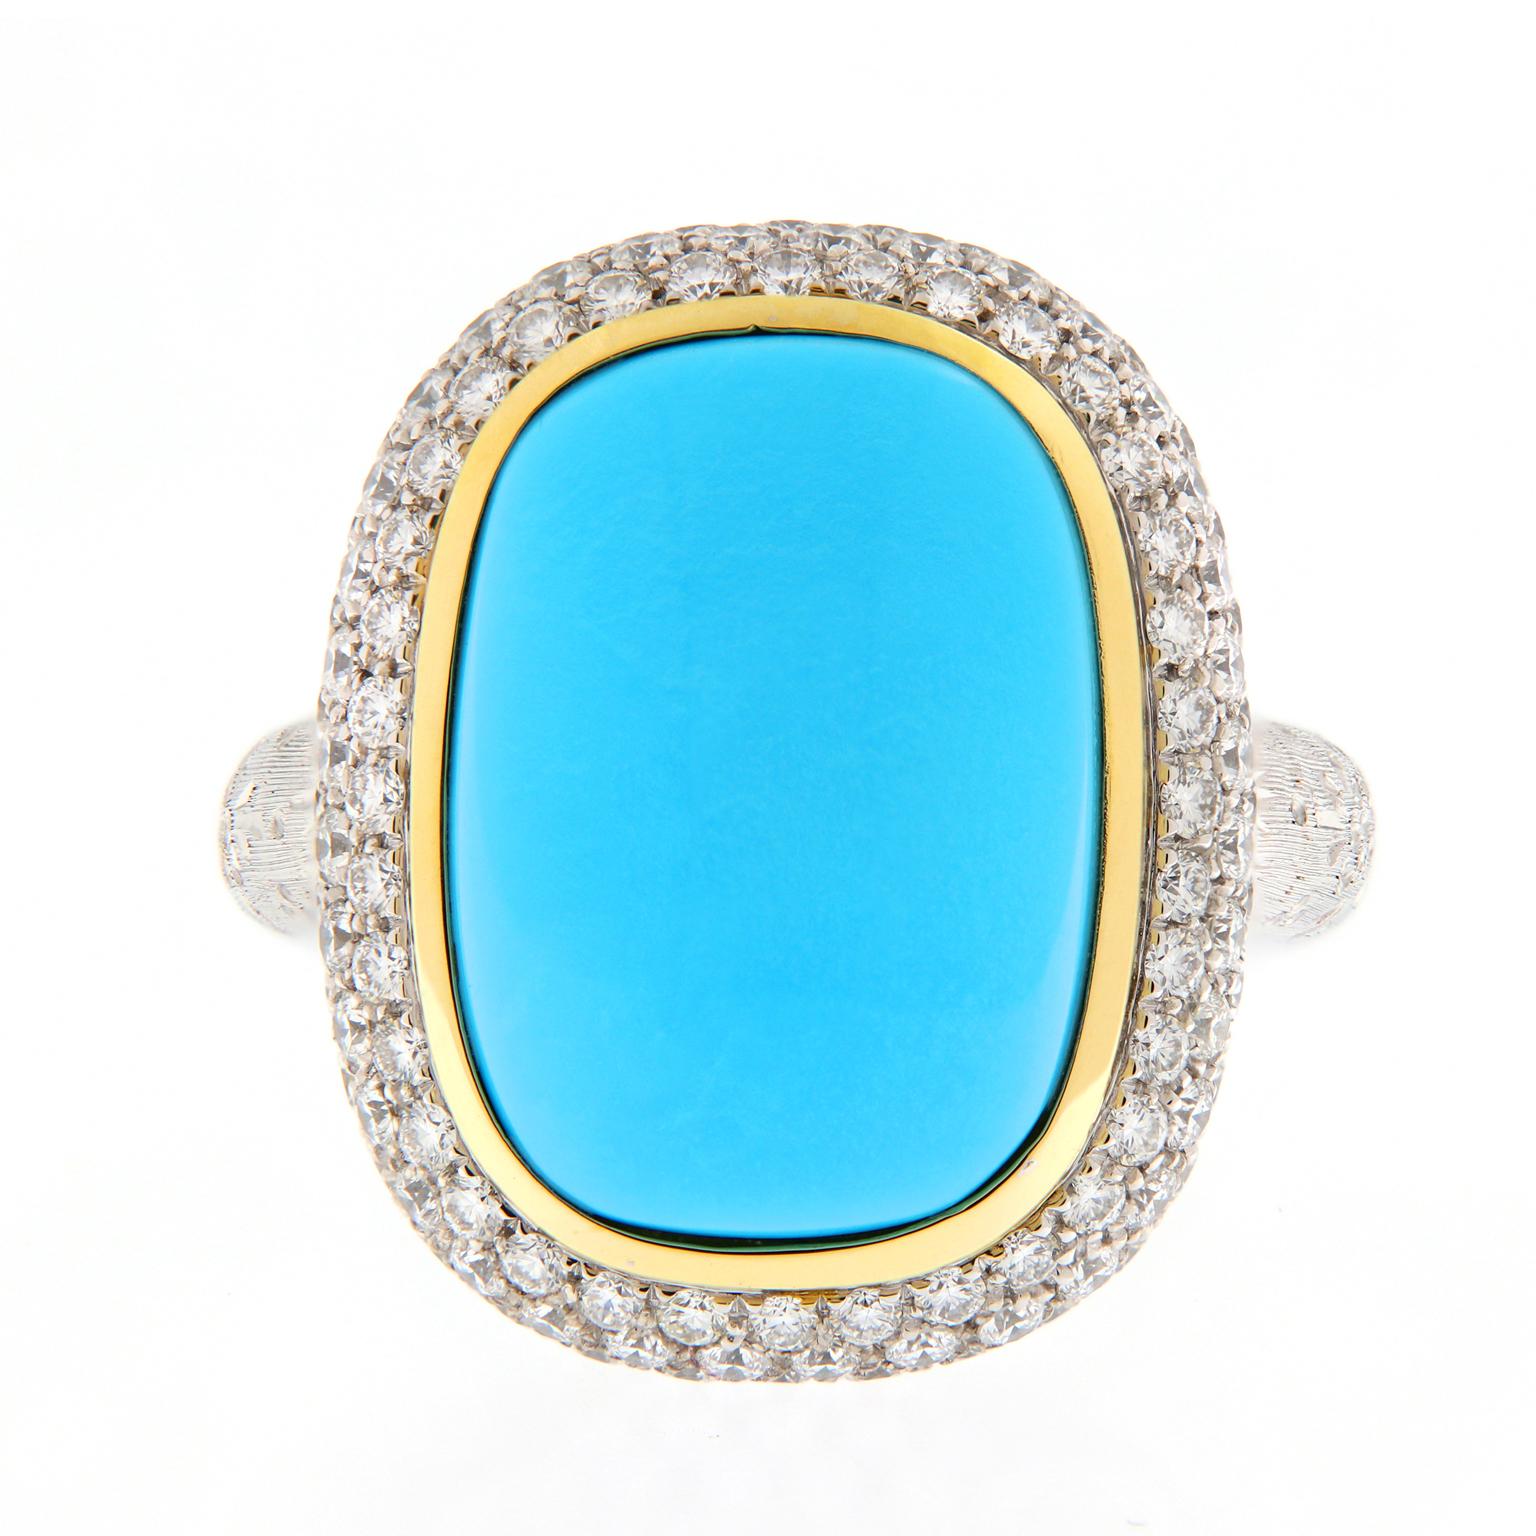 Outstanding display of color and Italian craftsmanship from Teri of Valenza, Italy. Persian turquoise is considered the most valuable variety, its robin’s egg blue is arguably the most beautiful turquoise. This ring centers around a cabochon